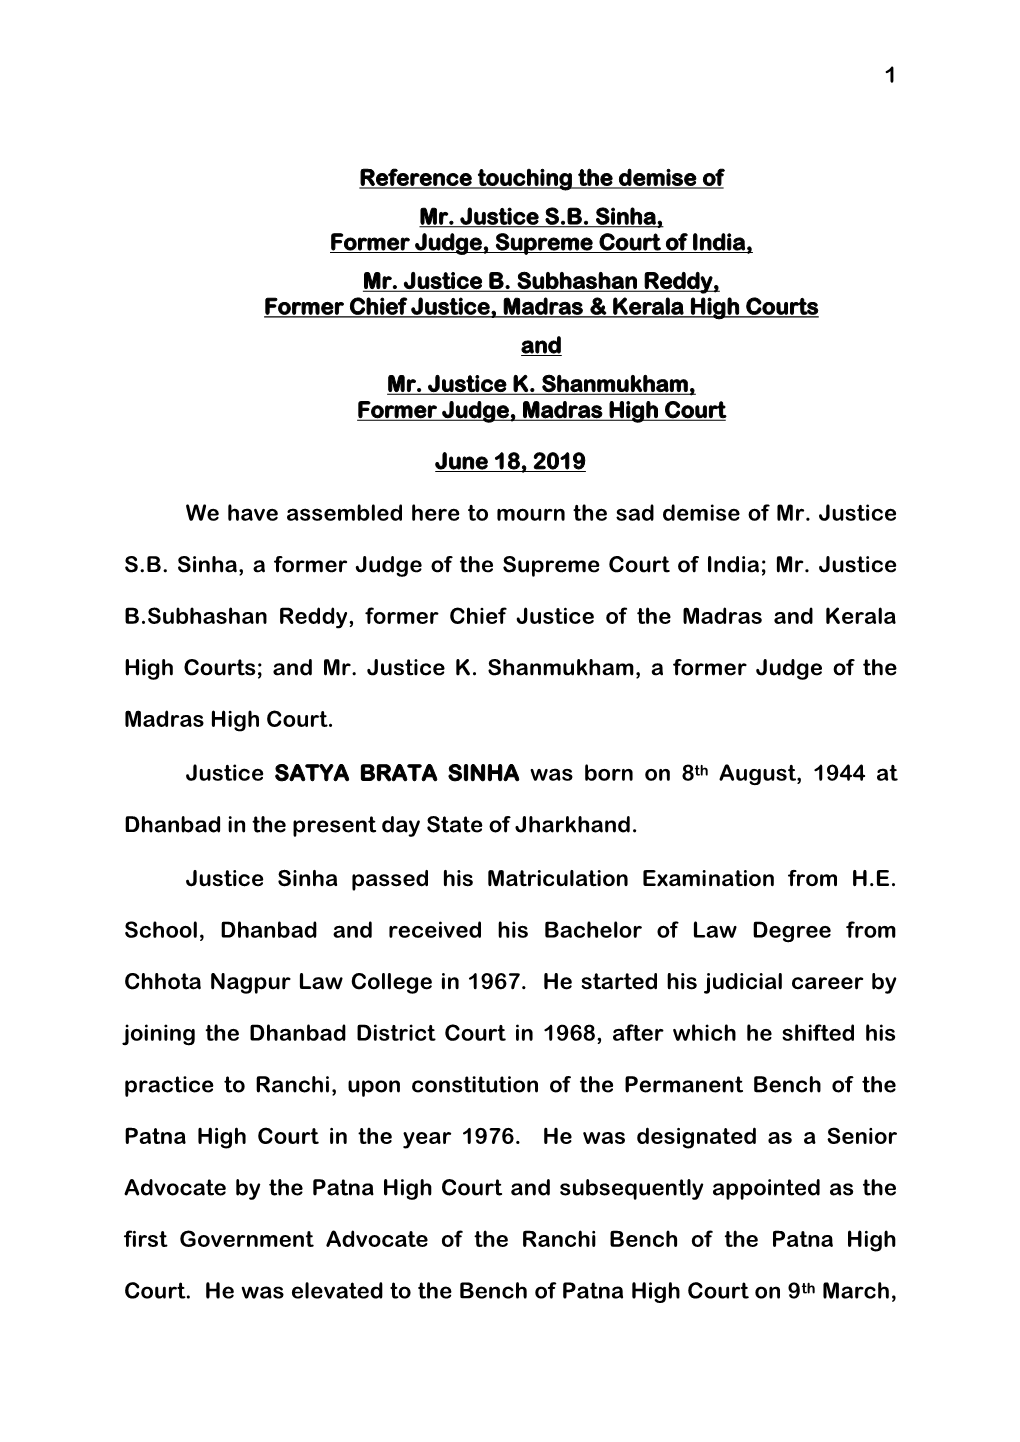 1 Reference Touching the Demise of Mr. Justice SB Sinha, Former Judge